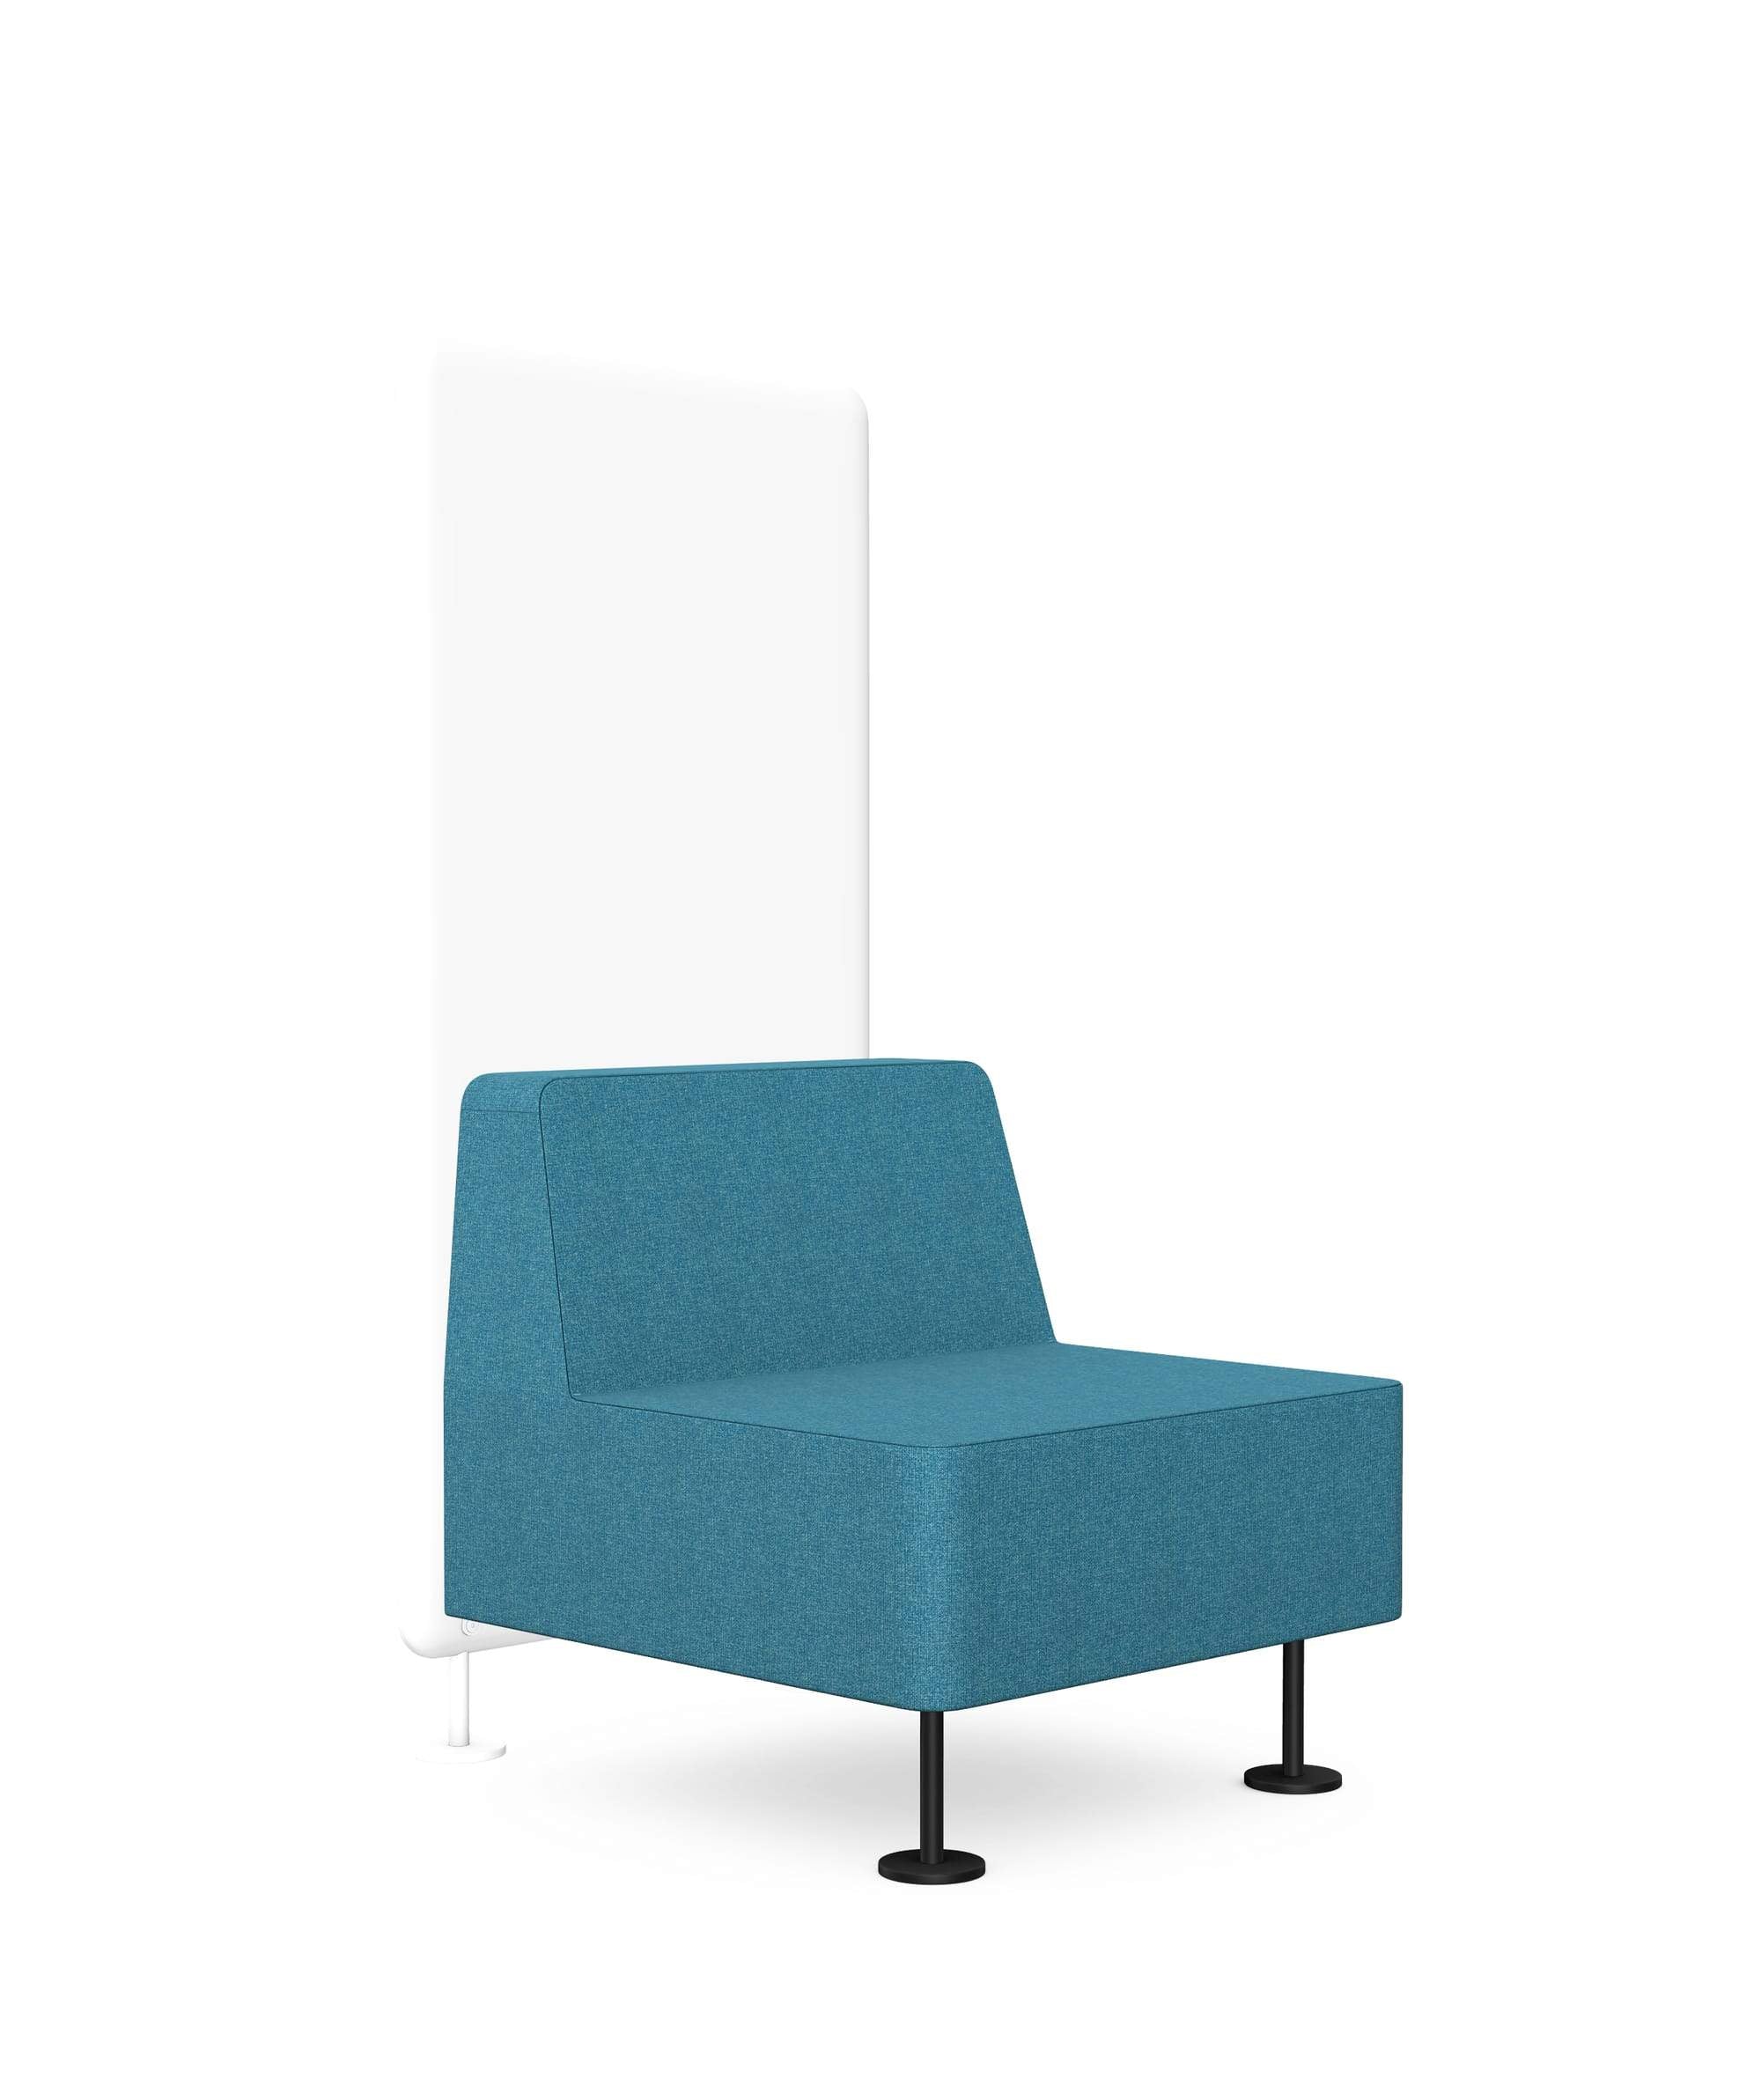 Wall In Armchair with 1 Partition Wall - Model 21